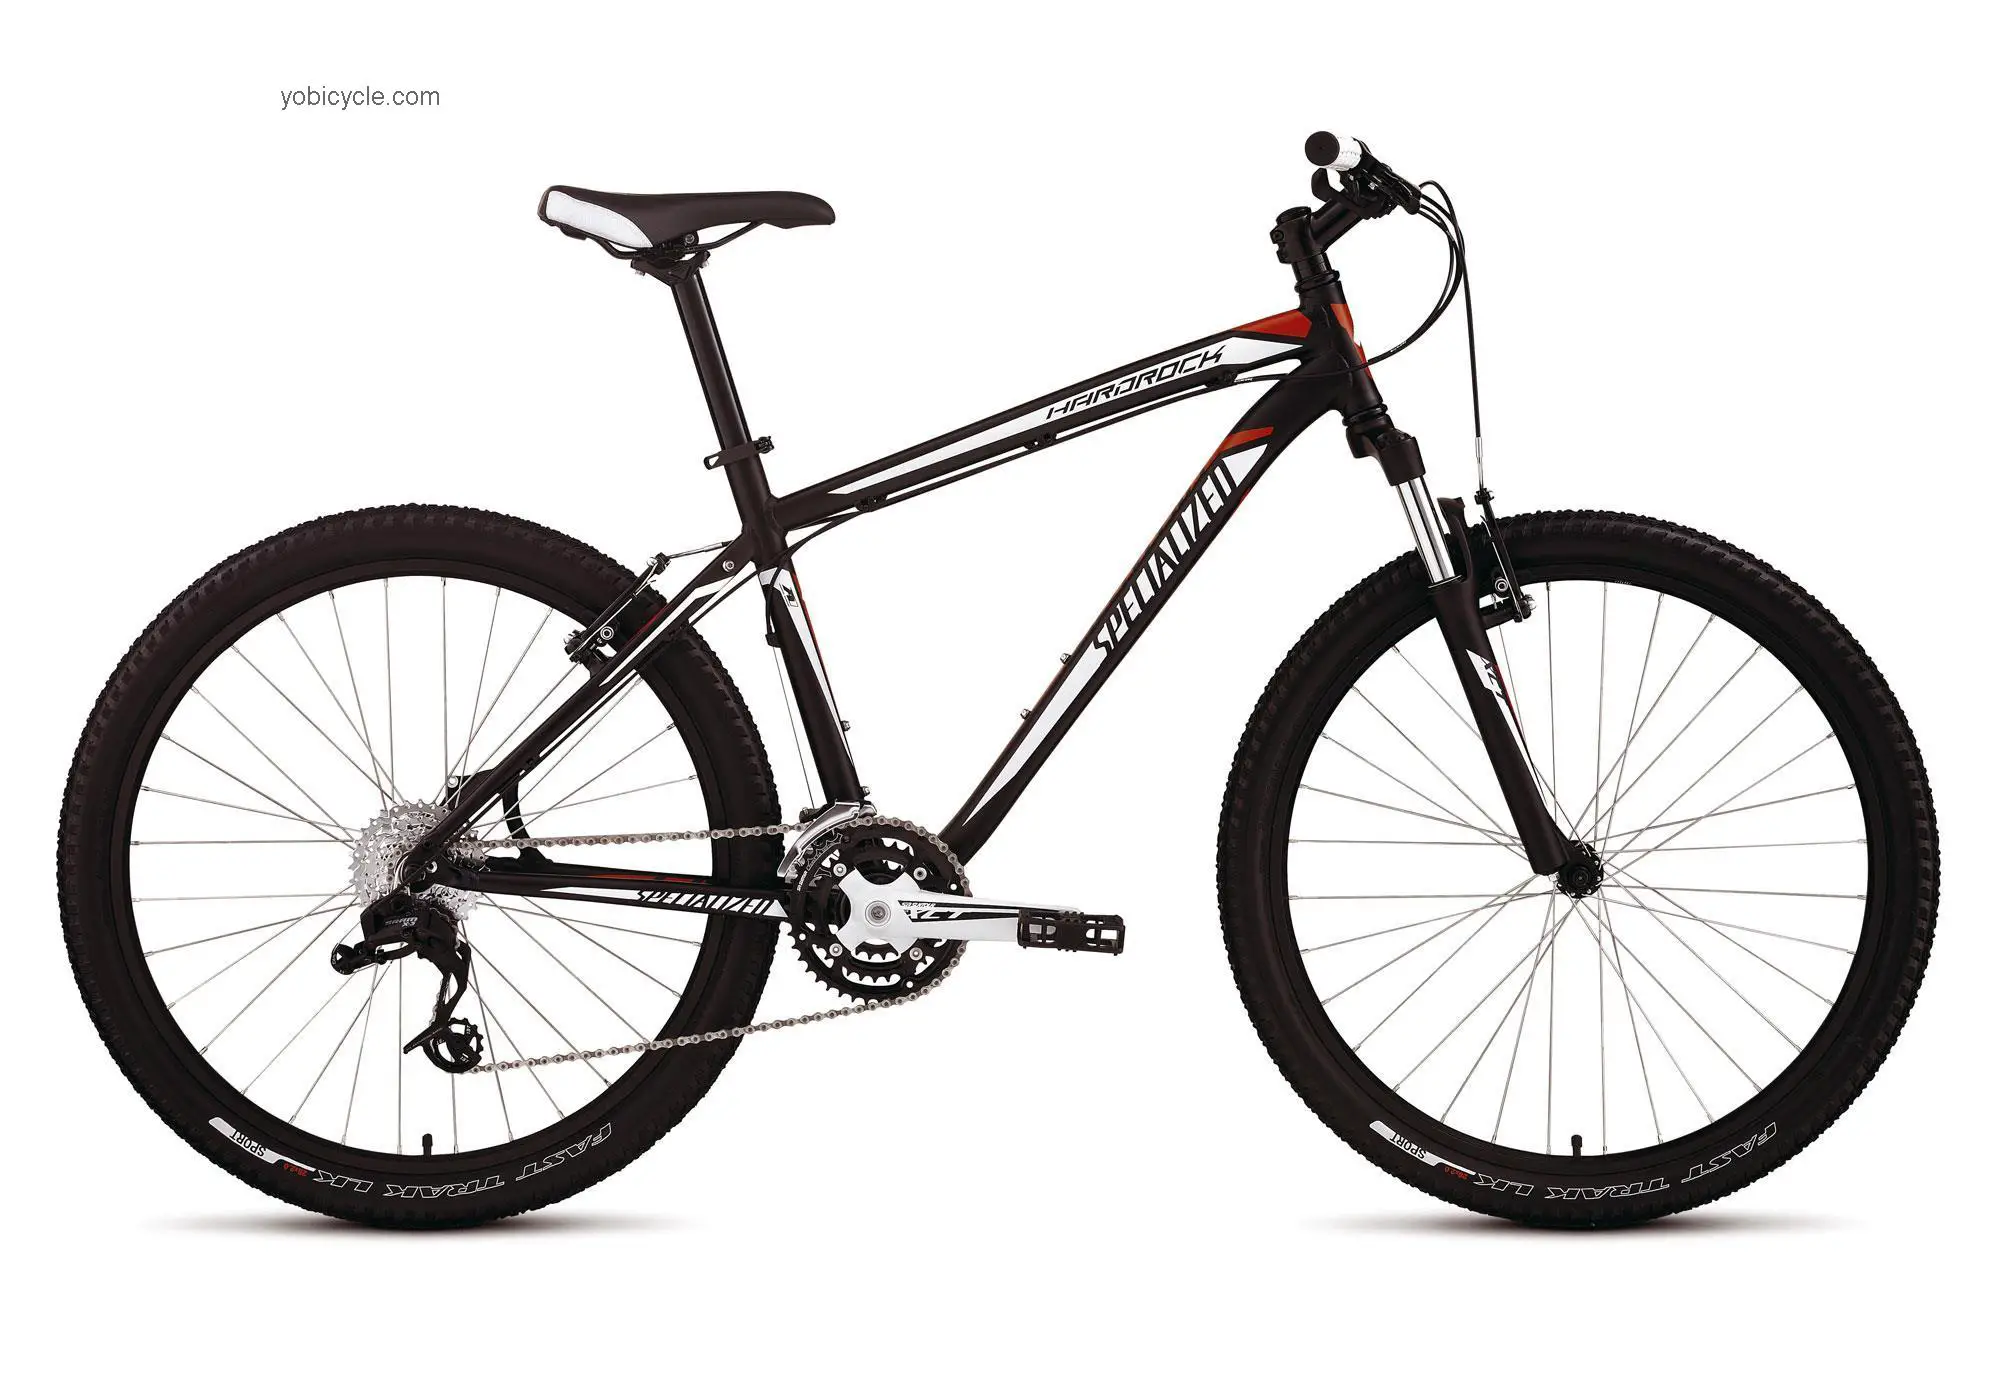 Specialized Hardrock competitors and comparison tool online specs and performance